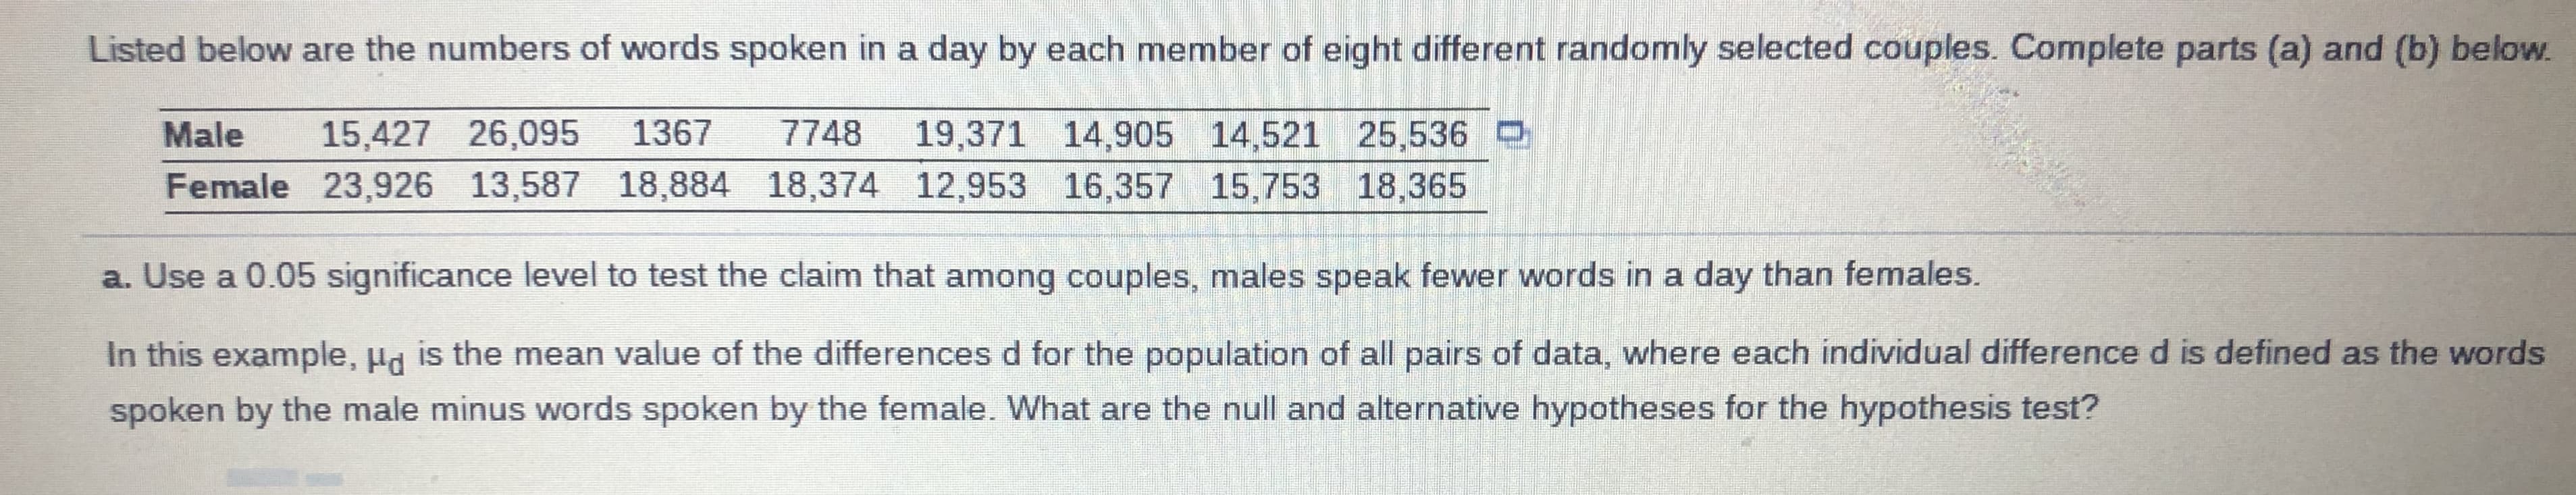 Listed below are the numbers of words spoken in a day by each member of eight different randomly selected couples. Complete parts (a) and (b) below.
Male
15,427 26,095
1367
7748
19,371 14,905 14,521 25,536 O
Female 23,926 13,587 18,884 18,374 12,953 16,357 15,753 18,365
a. Use a 0.05 significance level to test the claim that among couples, males speak fewer words in a day than females.
In this example, Ha is the mean value of the differences d for the population of all pairs of data, where each individual difference d is defined as the words
spoken by the male minus words spoken by the female. What are the null and alternative hypotheses for the hypothesis test?
